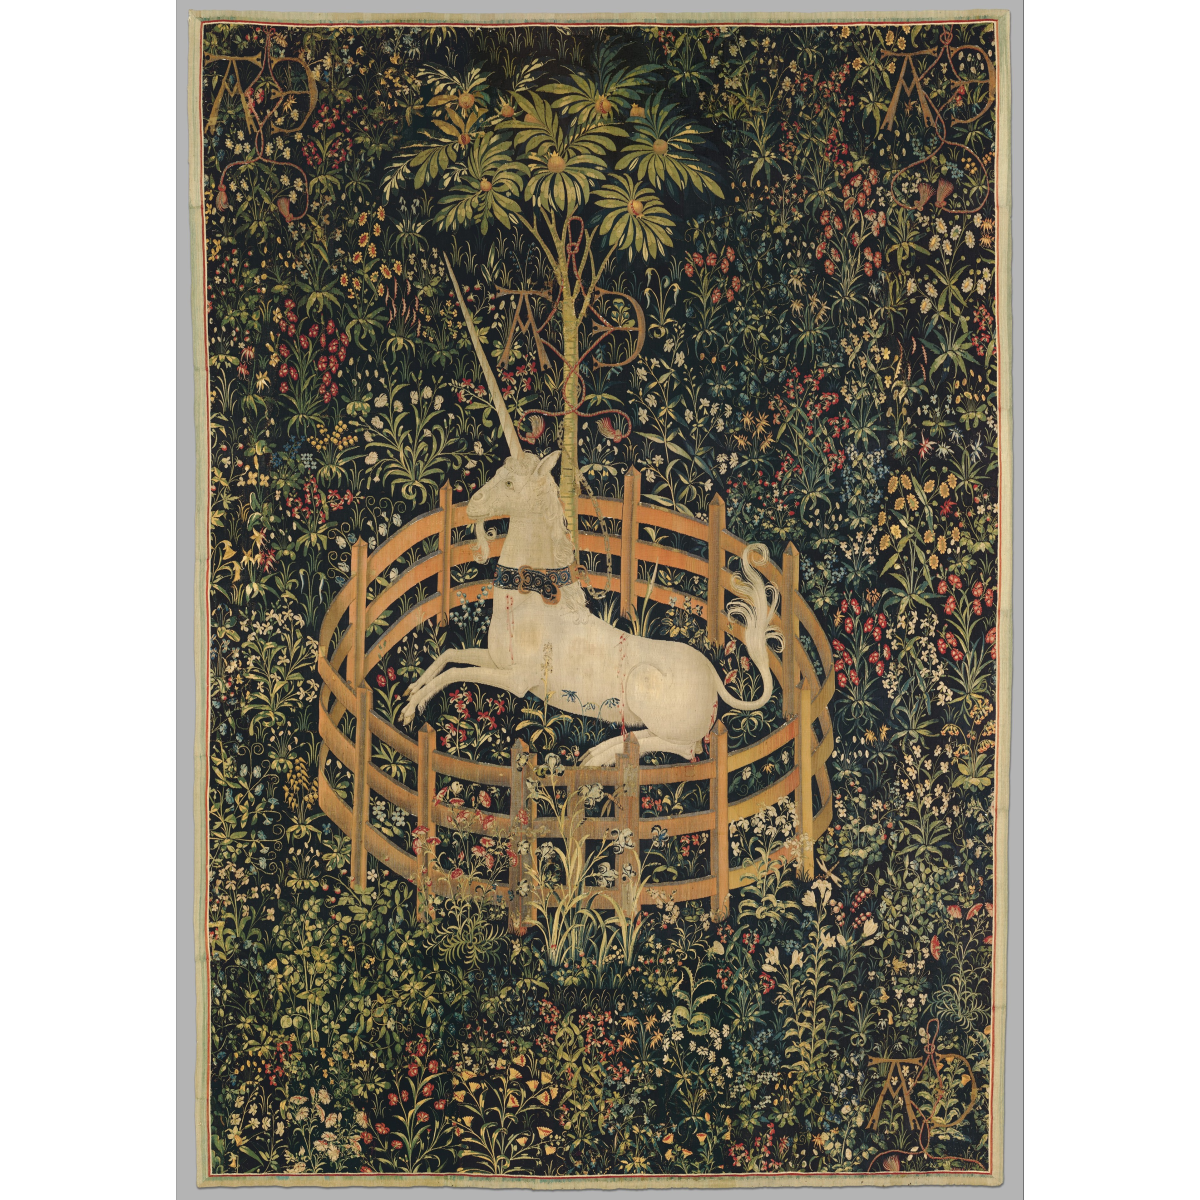 The Unicorn Rests in a Garden (tapestry).